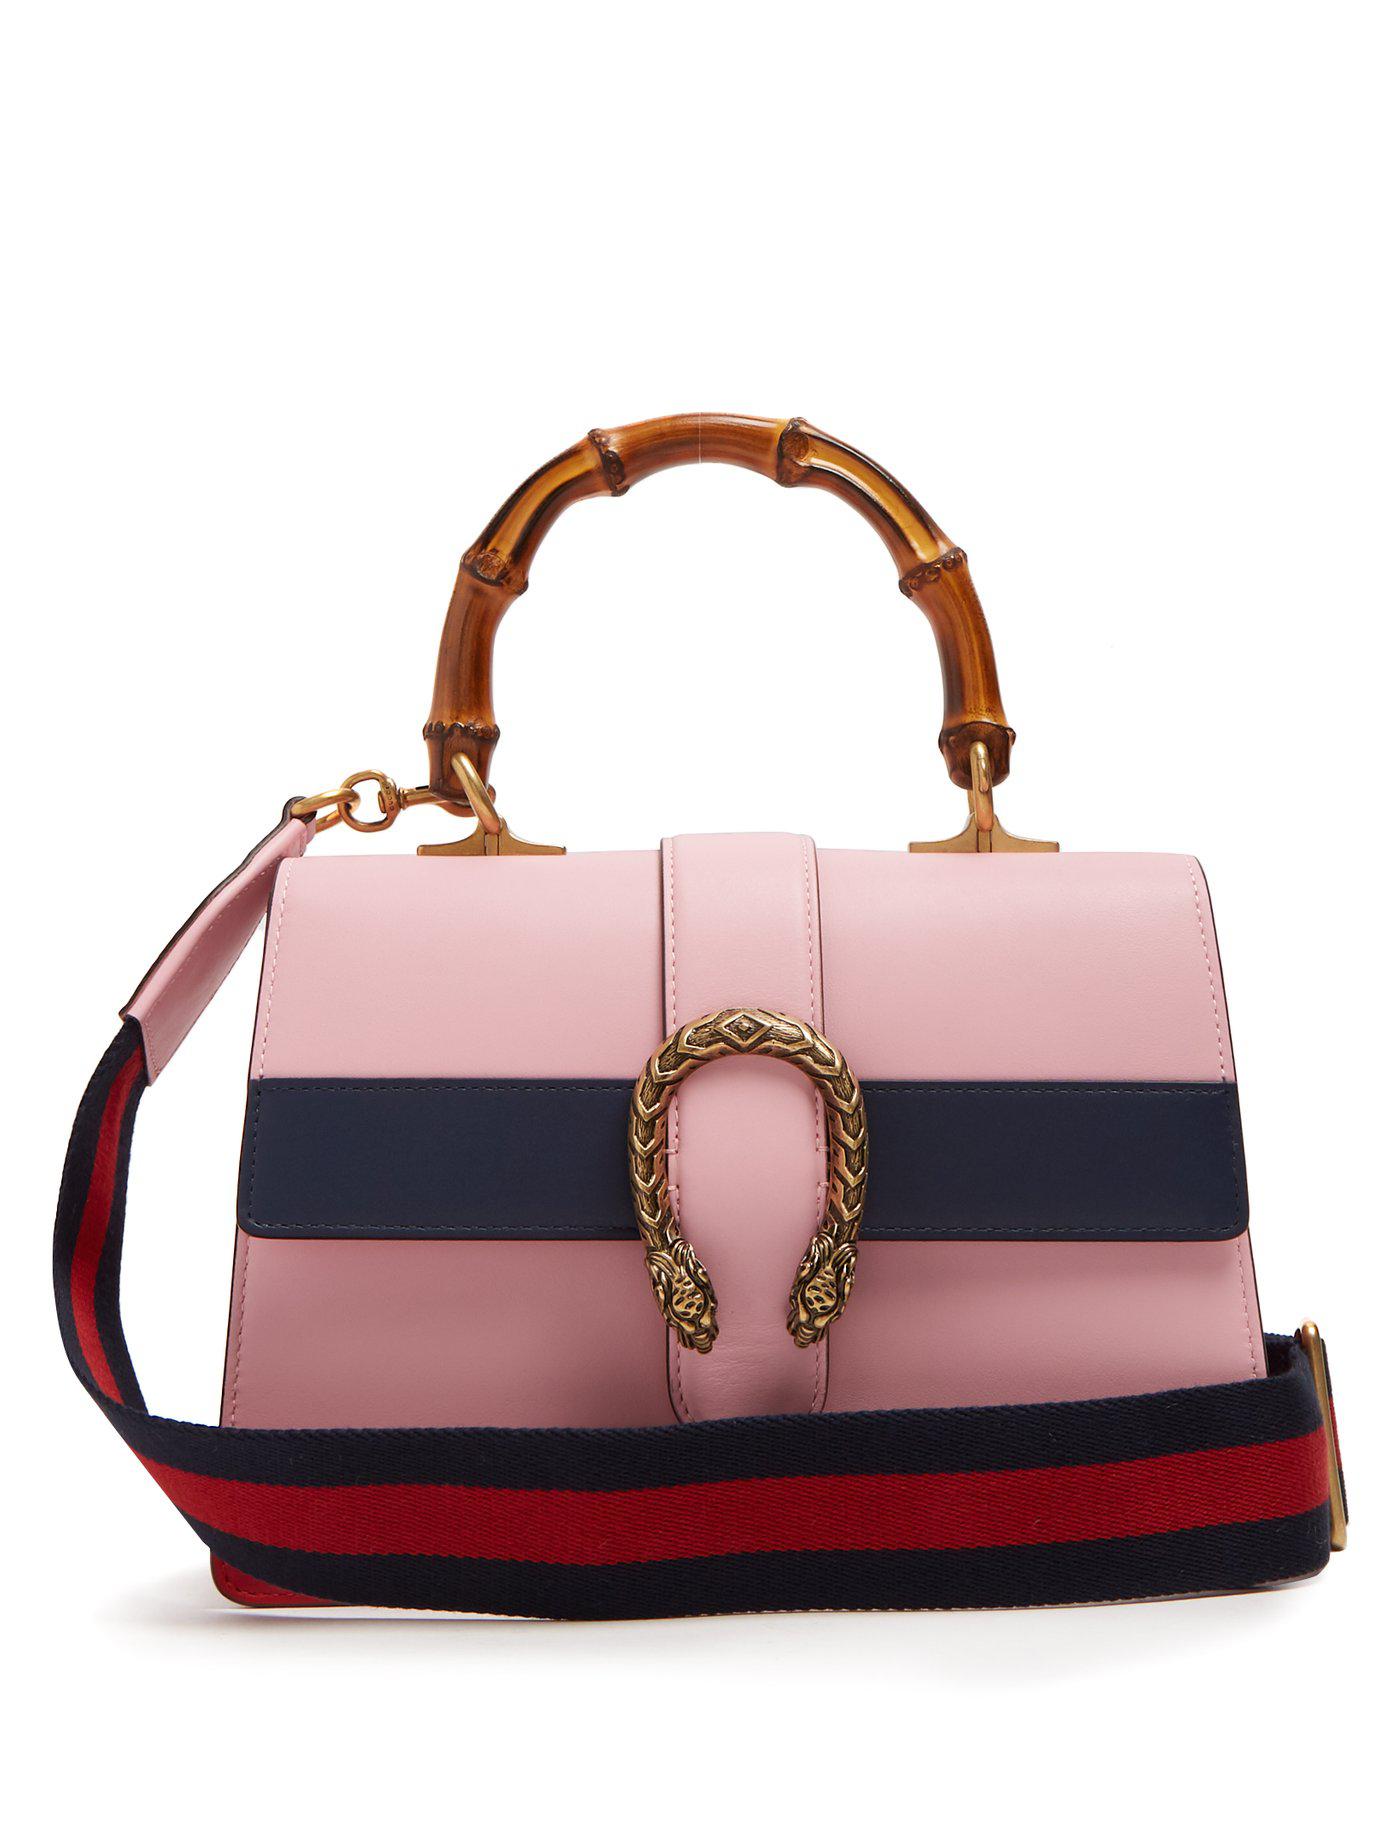 GUCCI Dionysus White Blue Red Medium Bamboo Top Handle Leather Bag